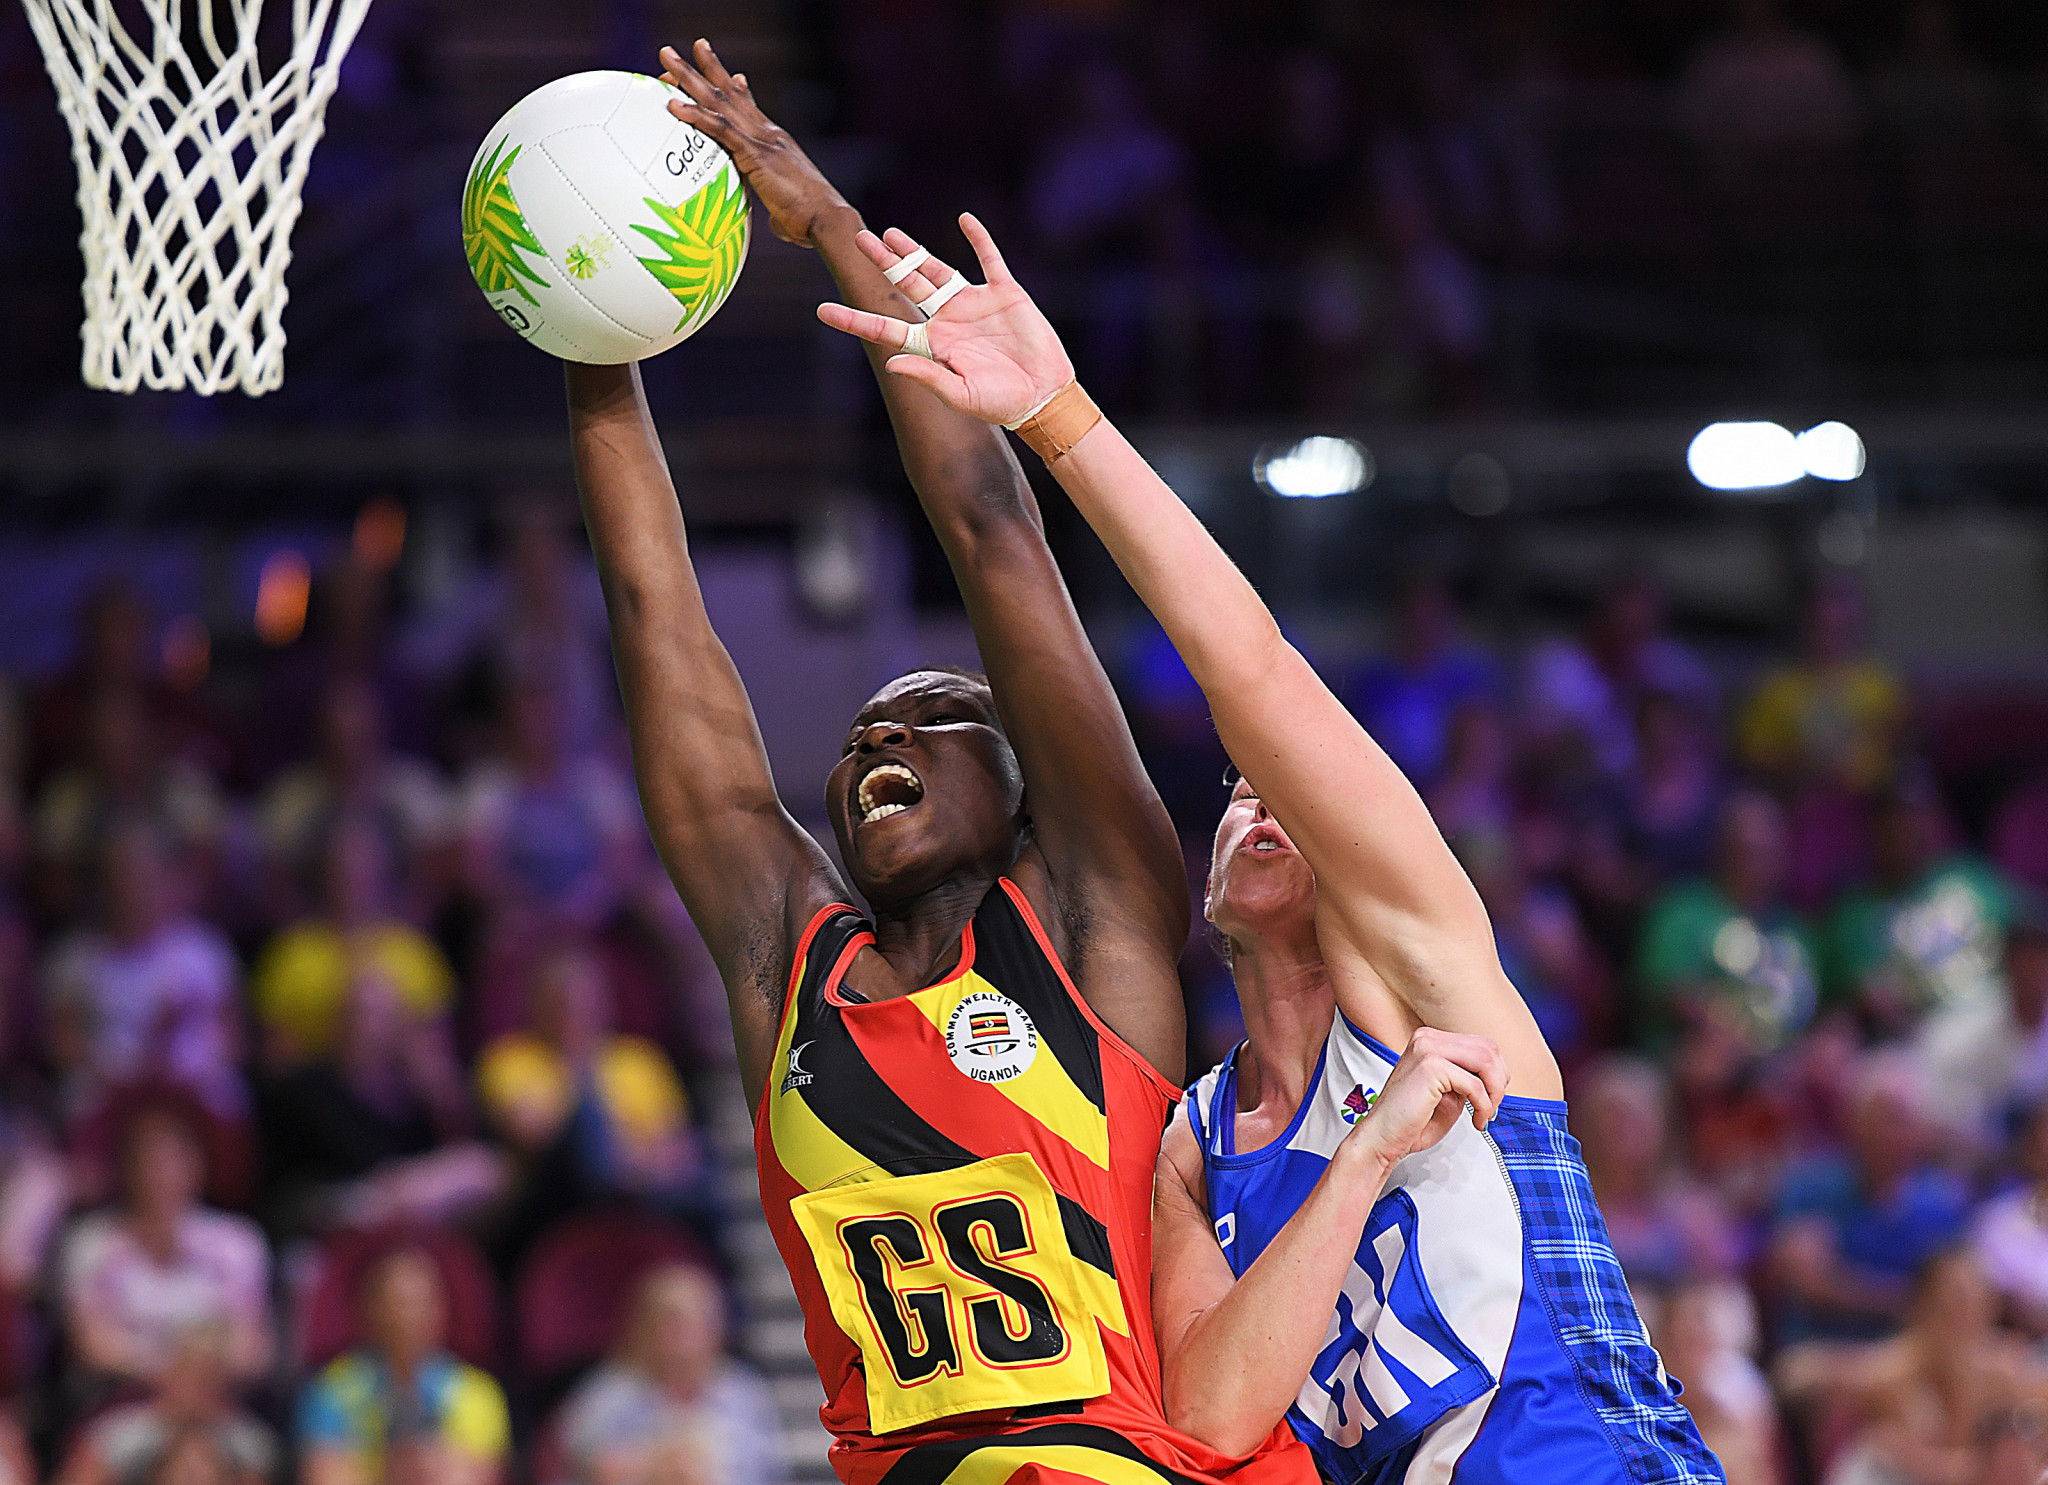 Uganda have qualified for the netball tournament at Birmingham 2022 ©Getty Images